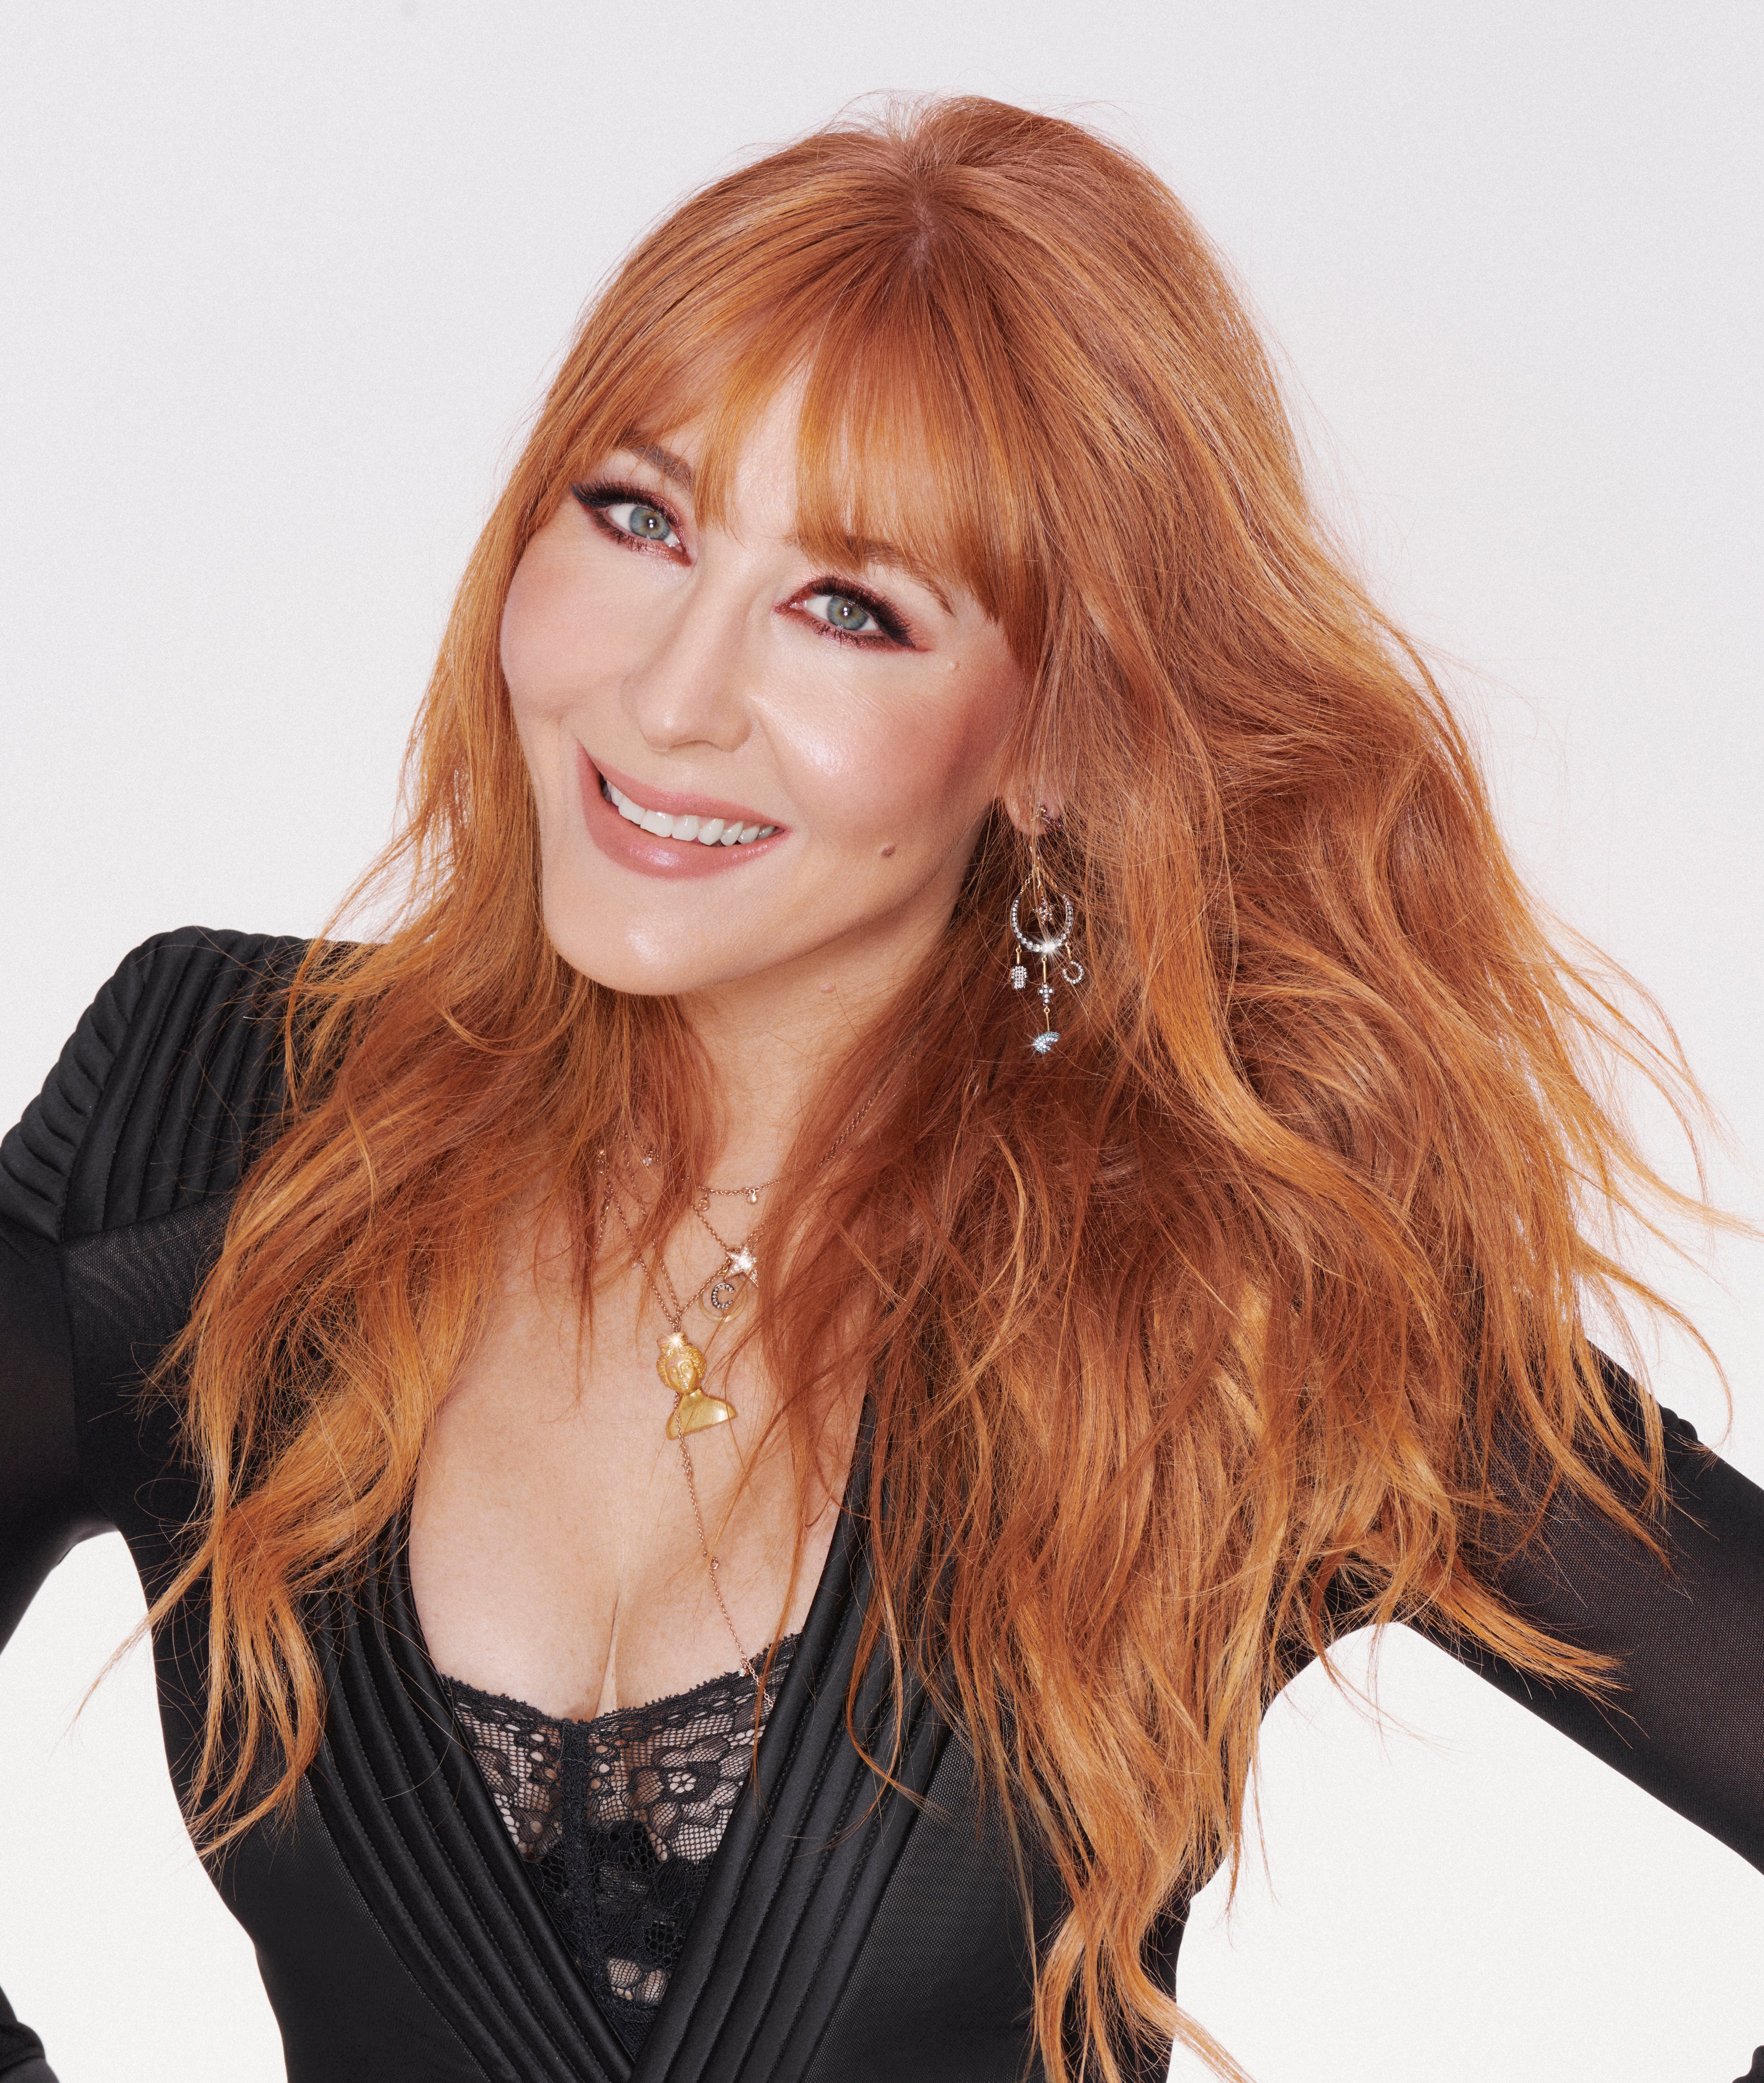 Charlotte Tilbury: If you feel and look your most confident self, you can  achieve anything